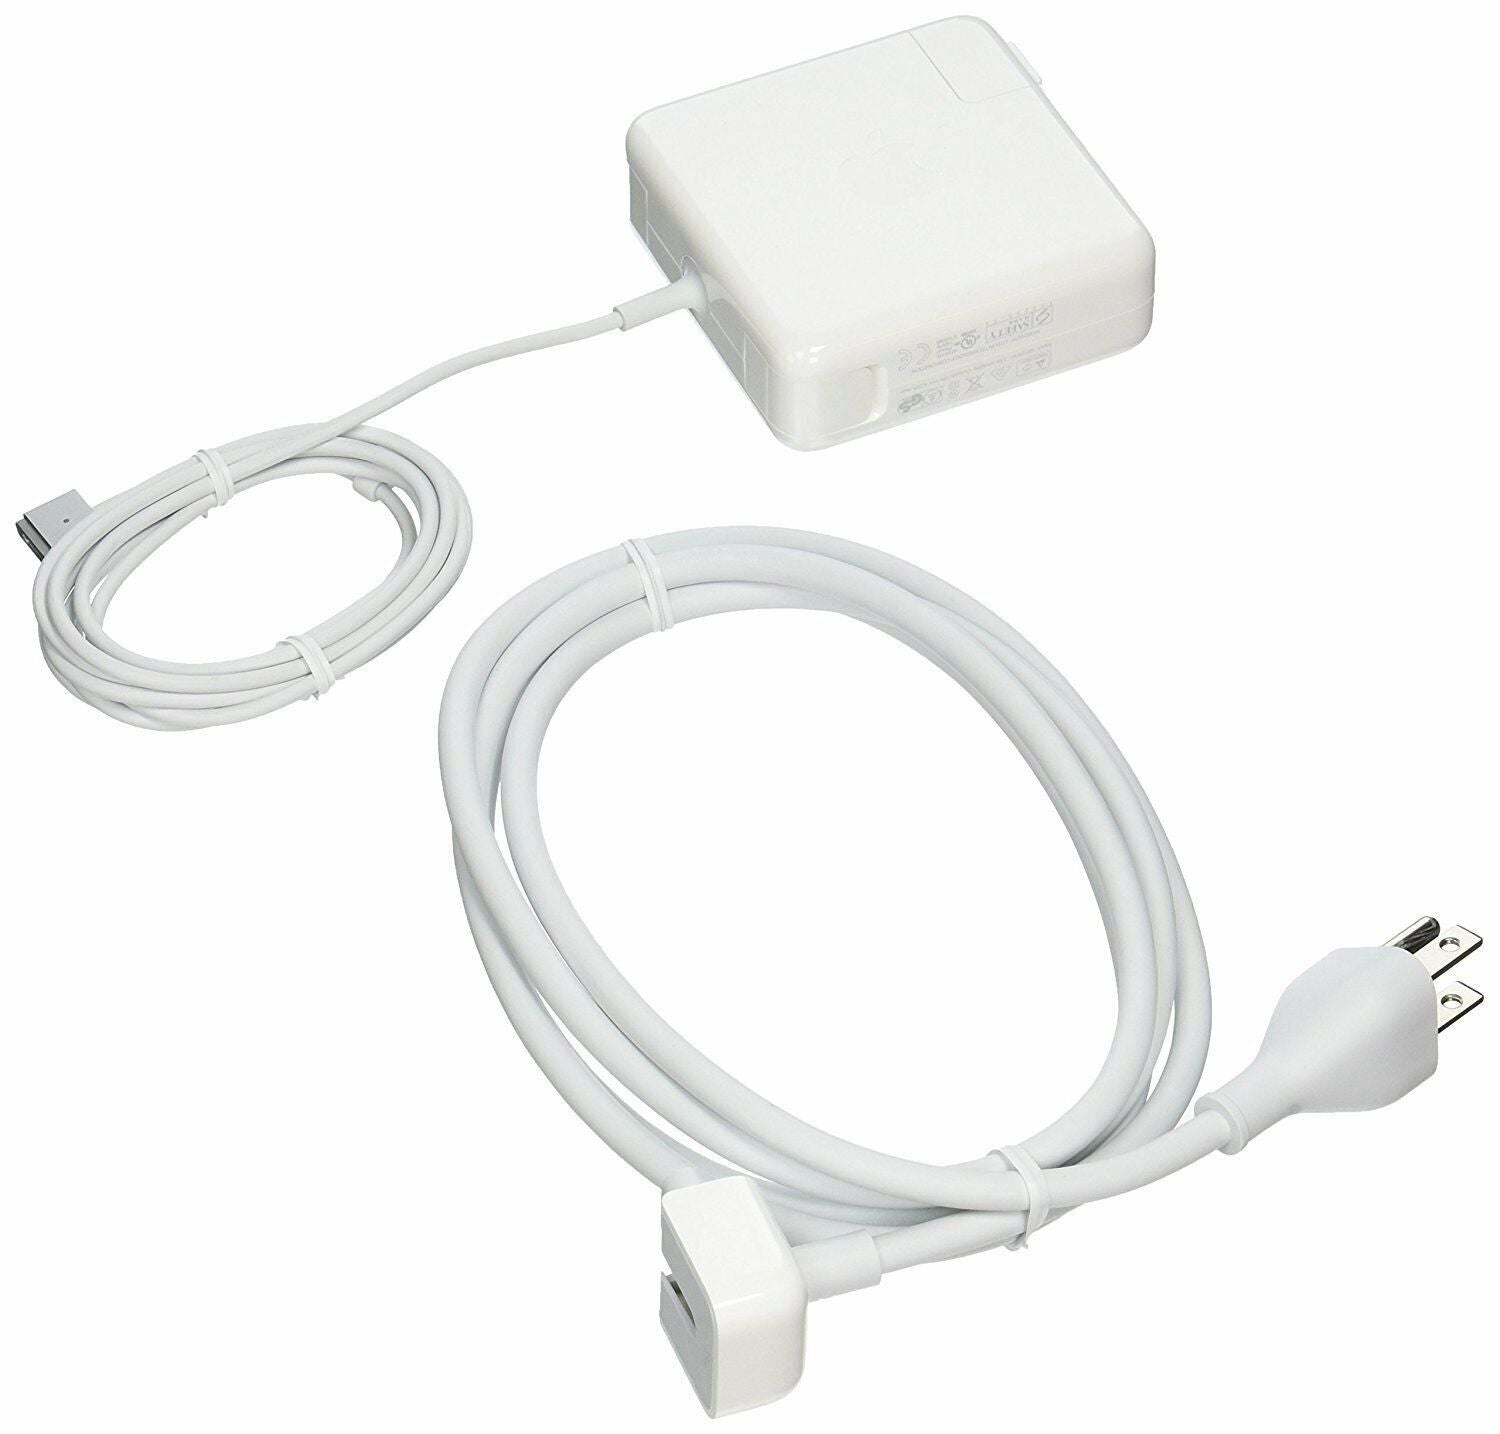 Apple 85W Magsafe 2 Power Adapter for Macbook Pro 15-inch GA